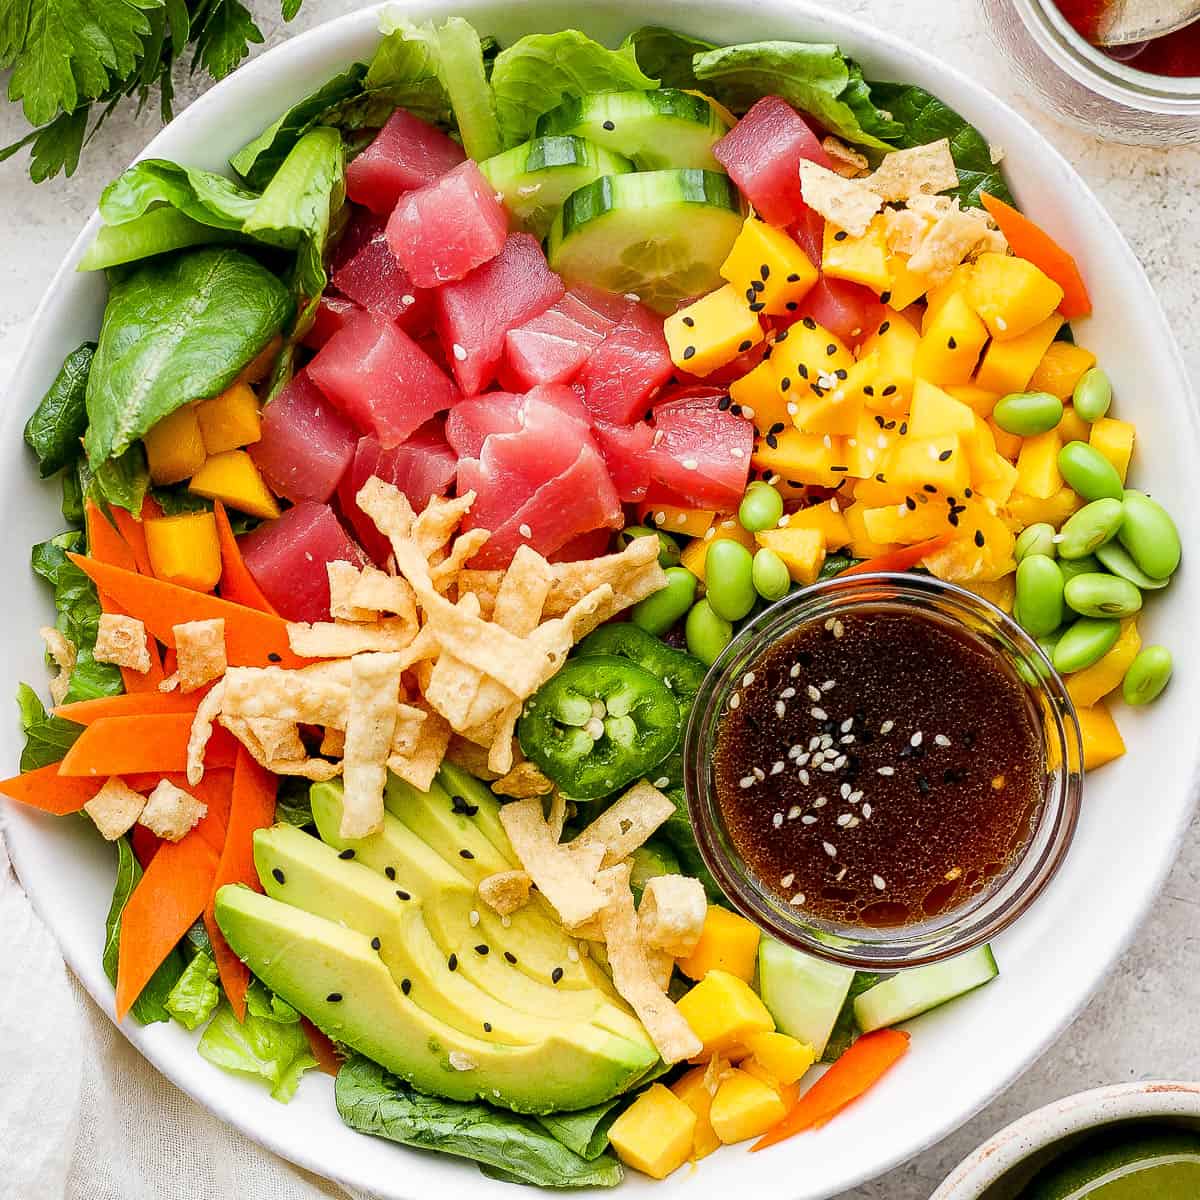 Top down shot of a poke salad in a shallow bowl with tuna, avocado, mango, carrot and a small bowl of sesame ginger dressing.